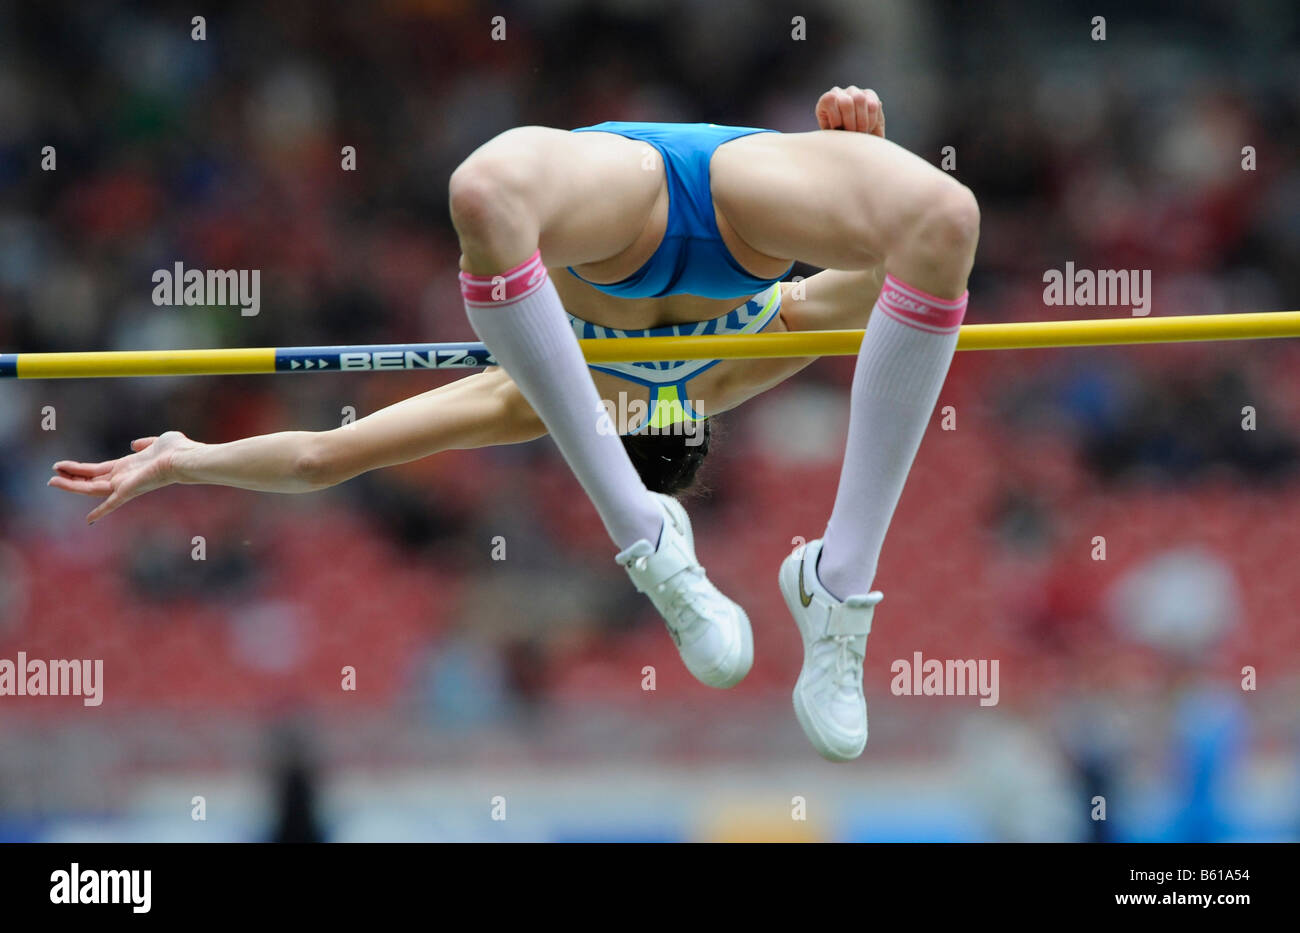 Ariane FRIEDRICH, GER, High Jump, at the IAAF 2008 World Athletics Final for track and field in the Mercedes-Benz Arena Stock Photo